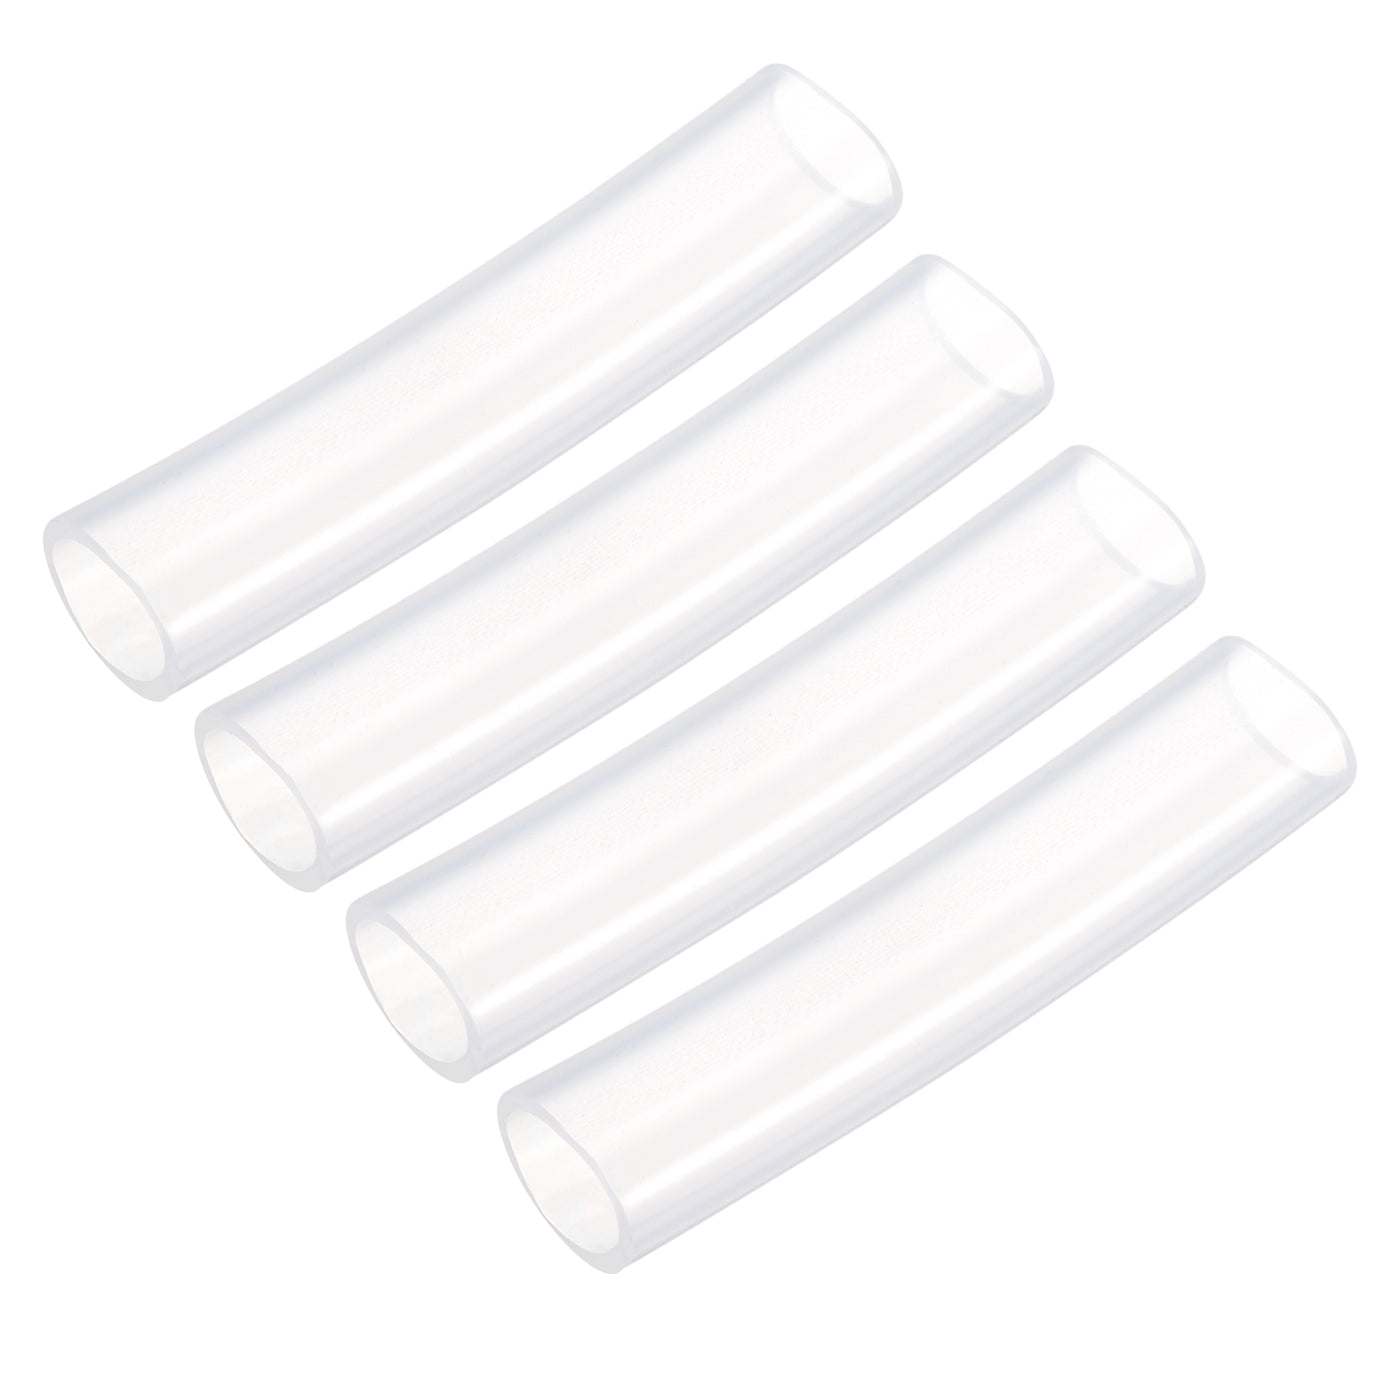 uxcell Uxcell Silicone Tubing 16mm ID,21mm OD 4Pcs 0.33 Ft for Pump Transfer, Transparent